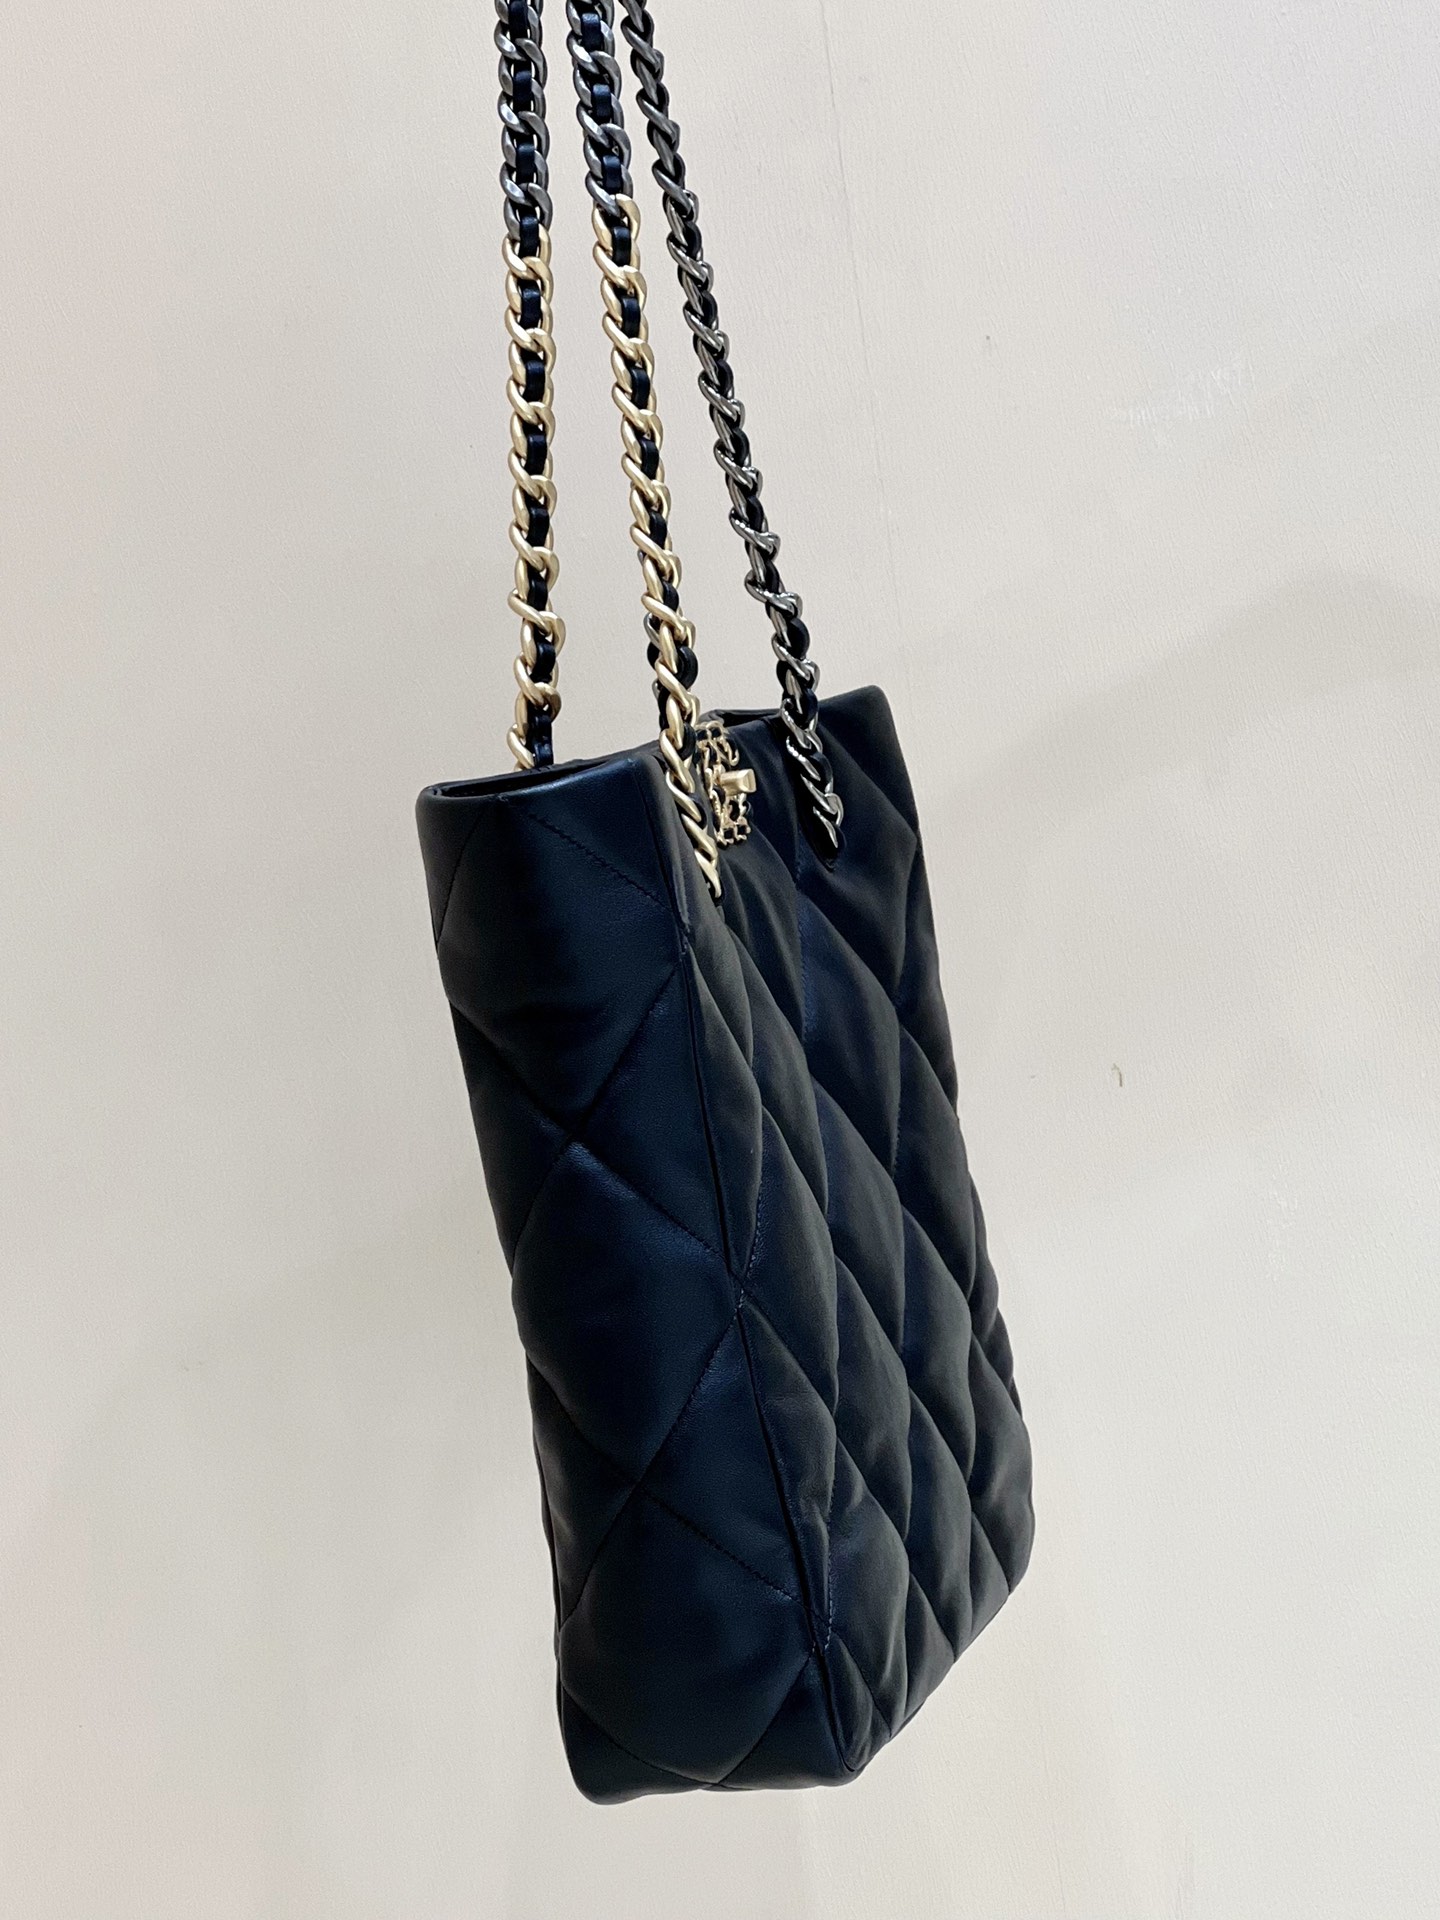 CHANEL 19 bag tote购物包 AS3519黑色